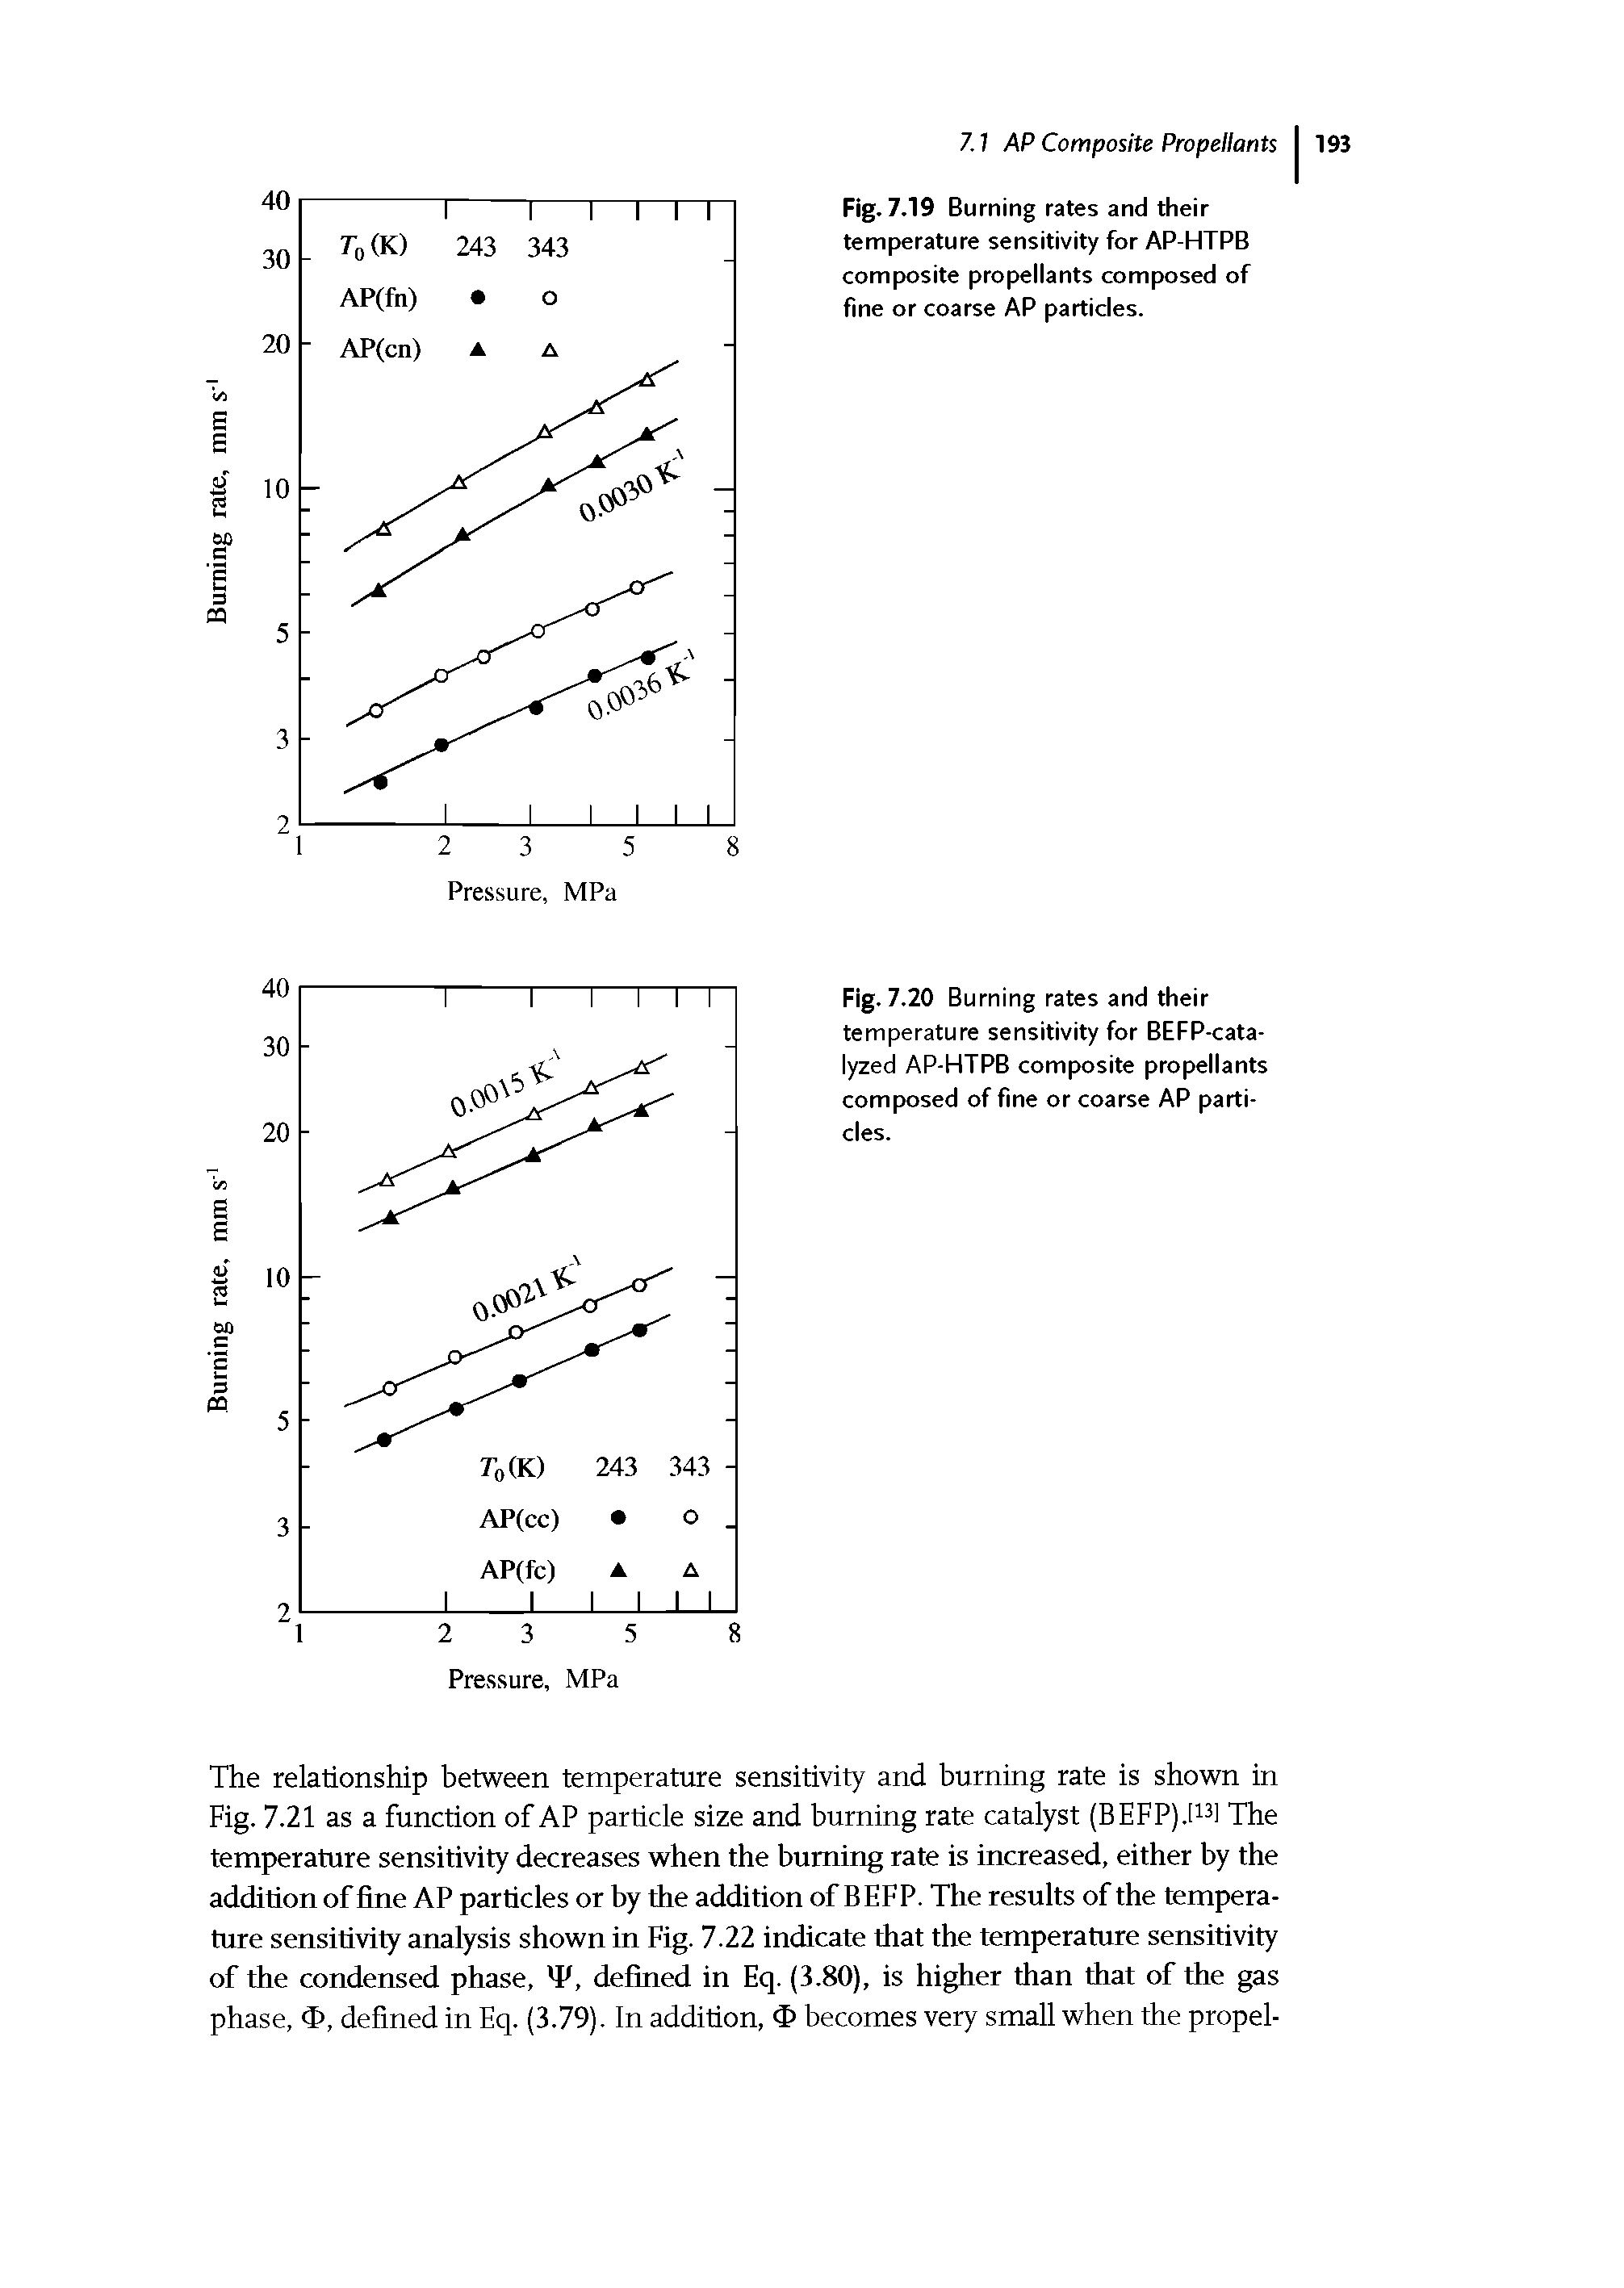 Fig. 7.19 Burning rates and their temperature sensitivity for AP-HTPB composite propellants composed of fine or coarse AP particles.